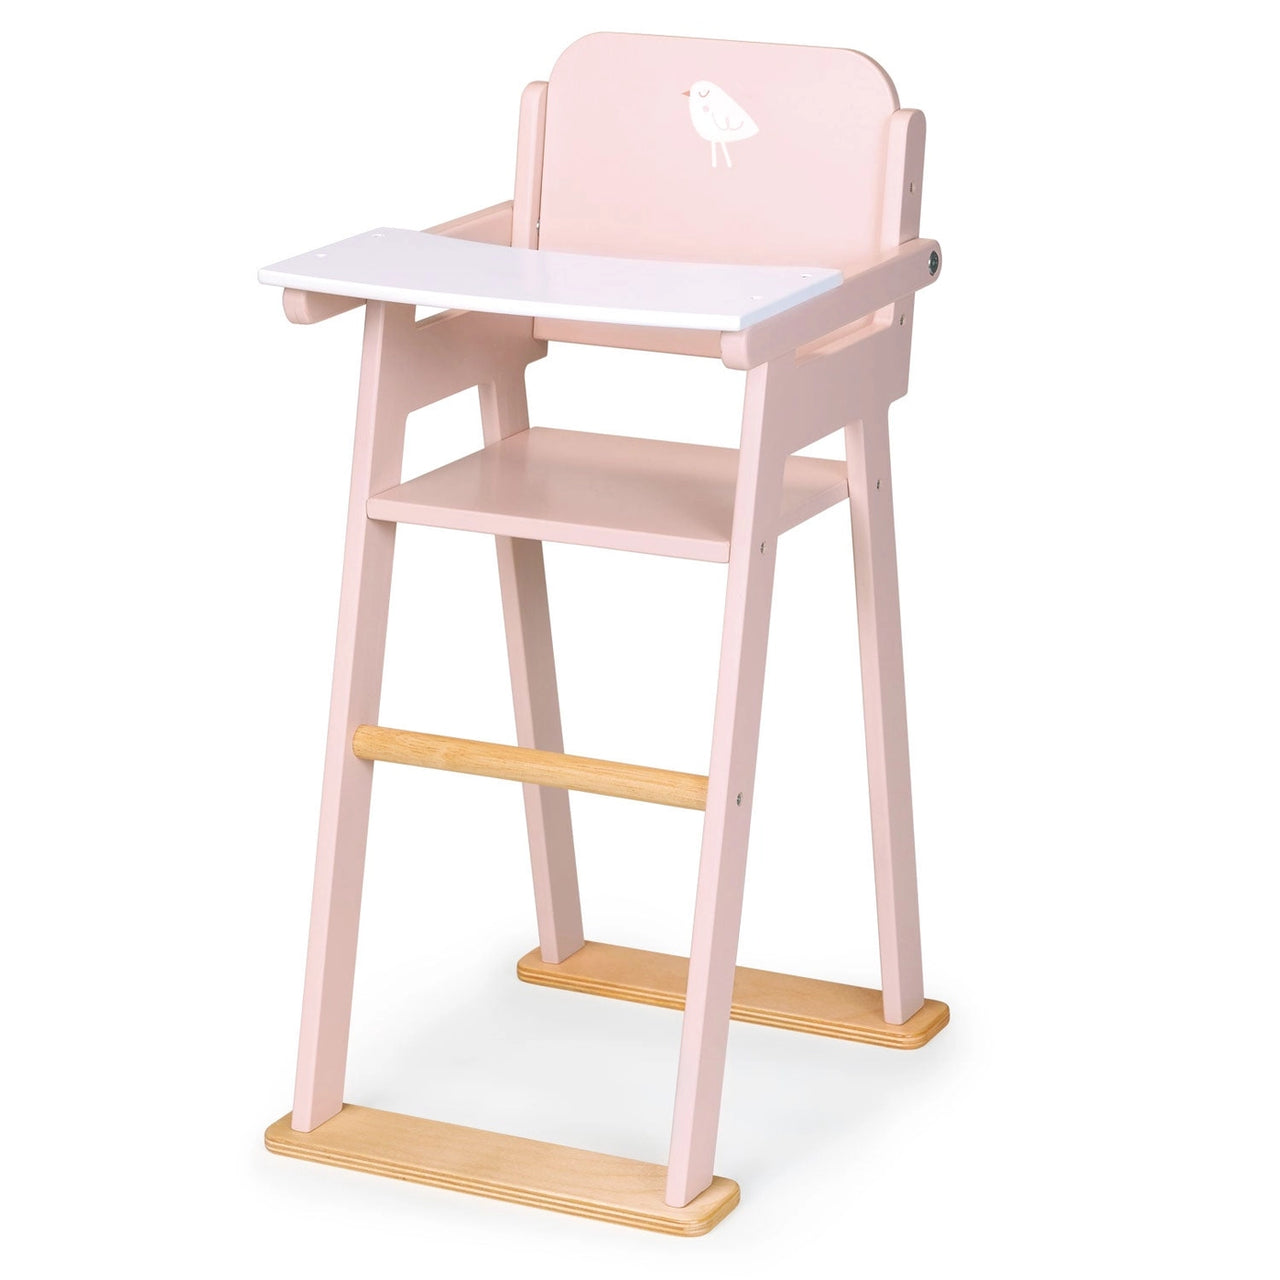 Wooden Baby Doll High Chair